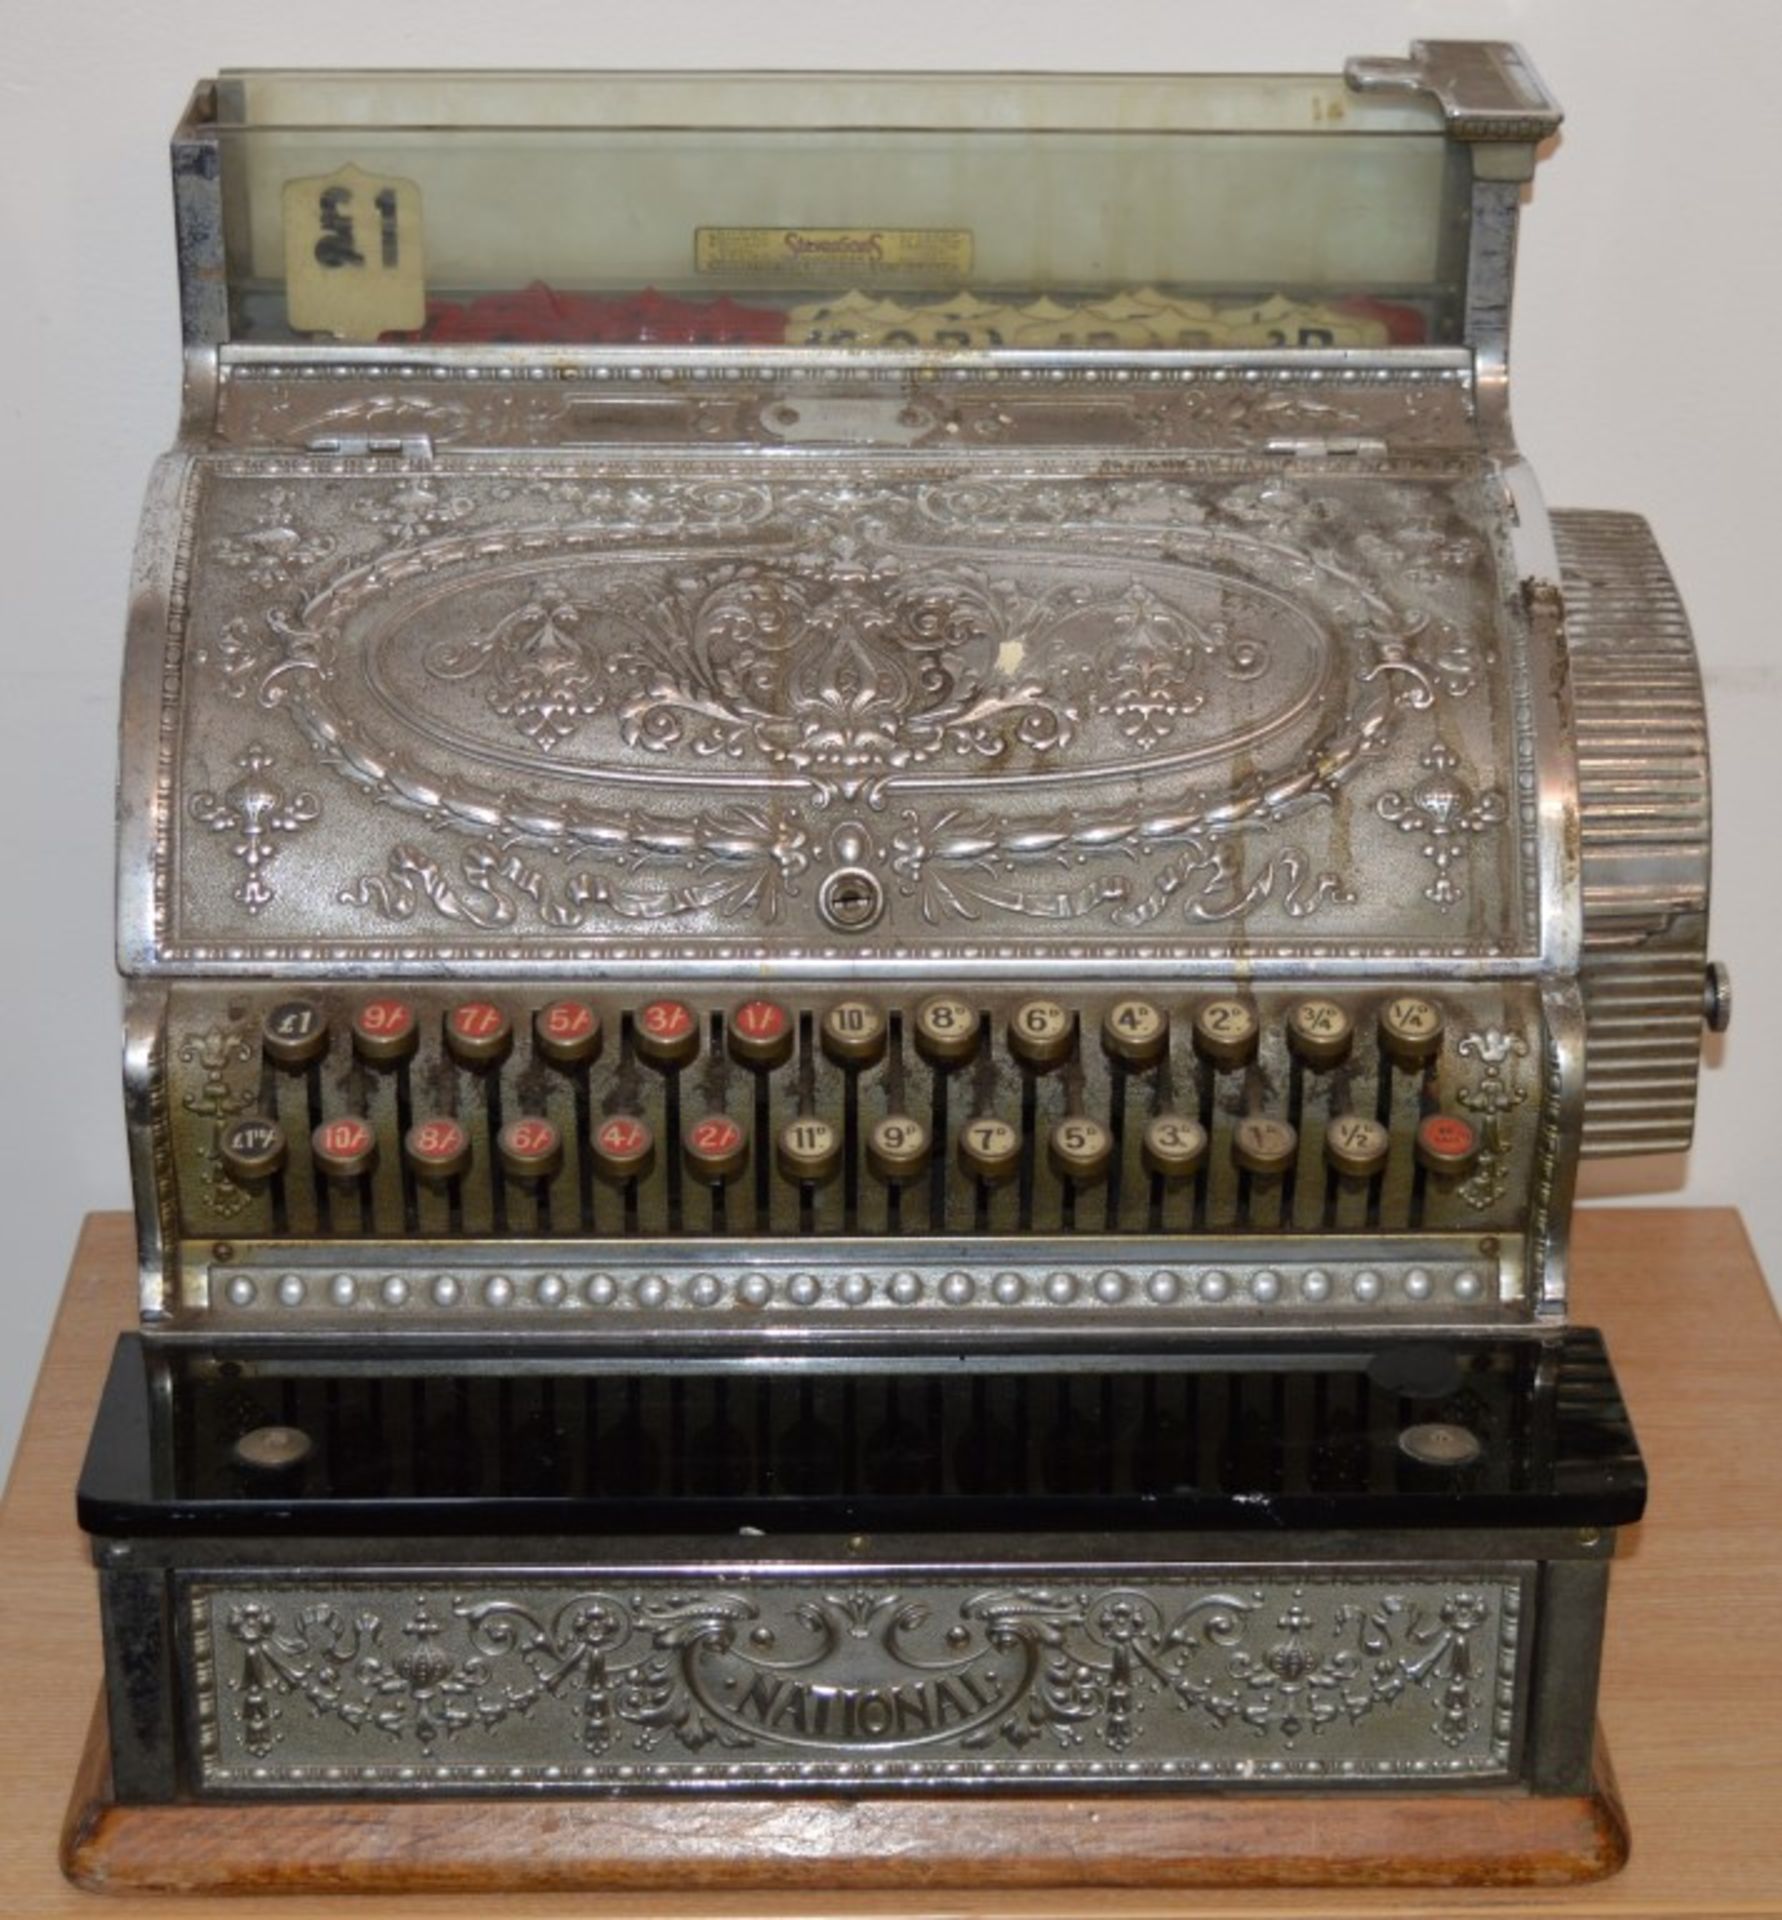 1 x Exquisite Antique National Cash Register - Circa Early 1900's - Perfect For Barbers Shop, Tattoo